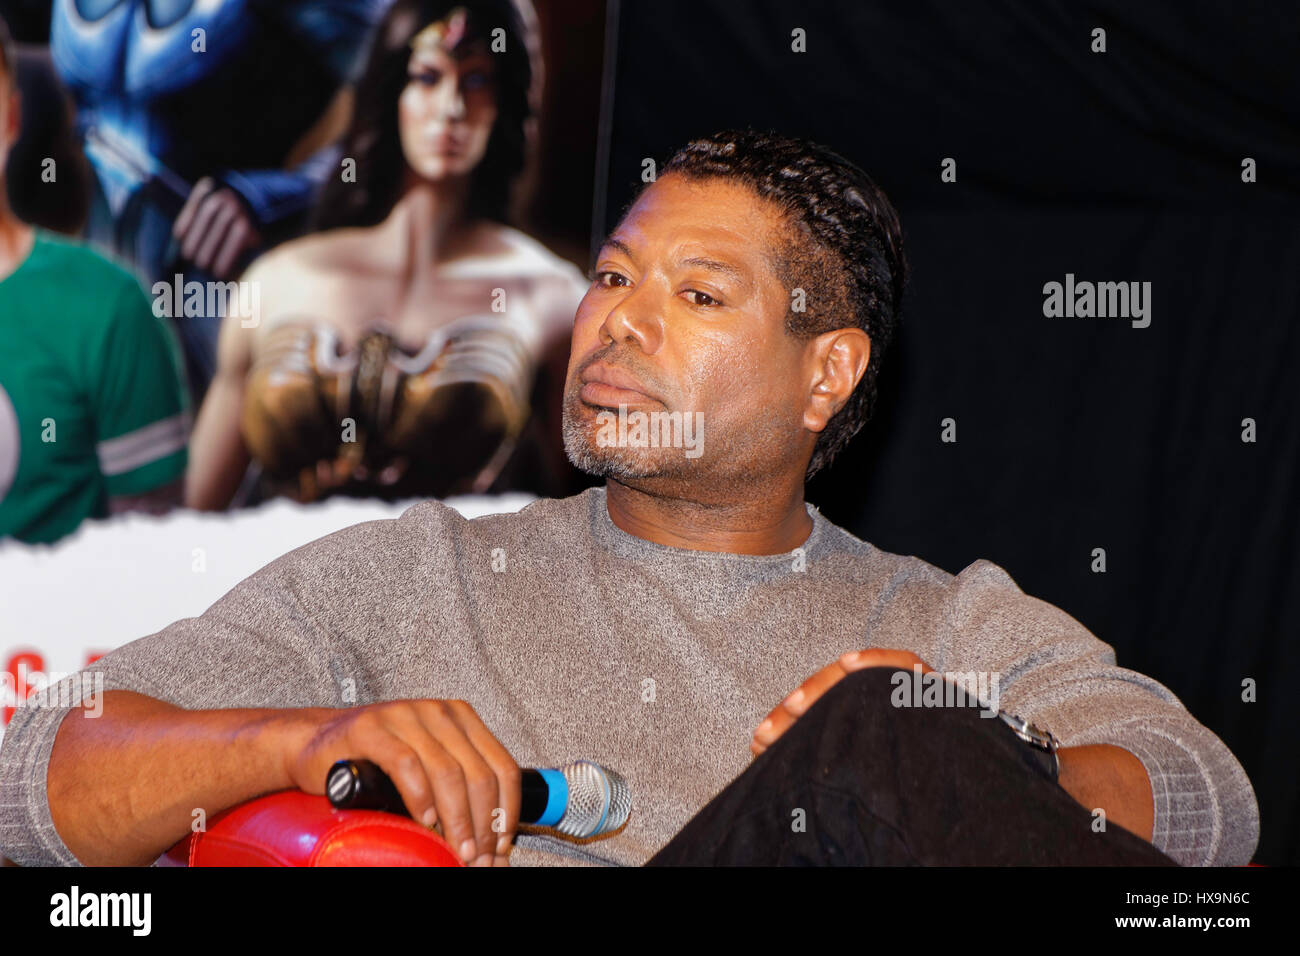 Actor Christopher Judge is photographed for BAFTA on March 25, 2025 News  Photo - Getty Images